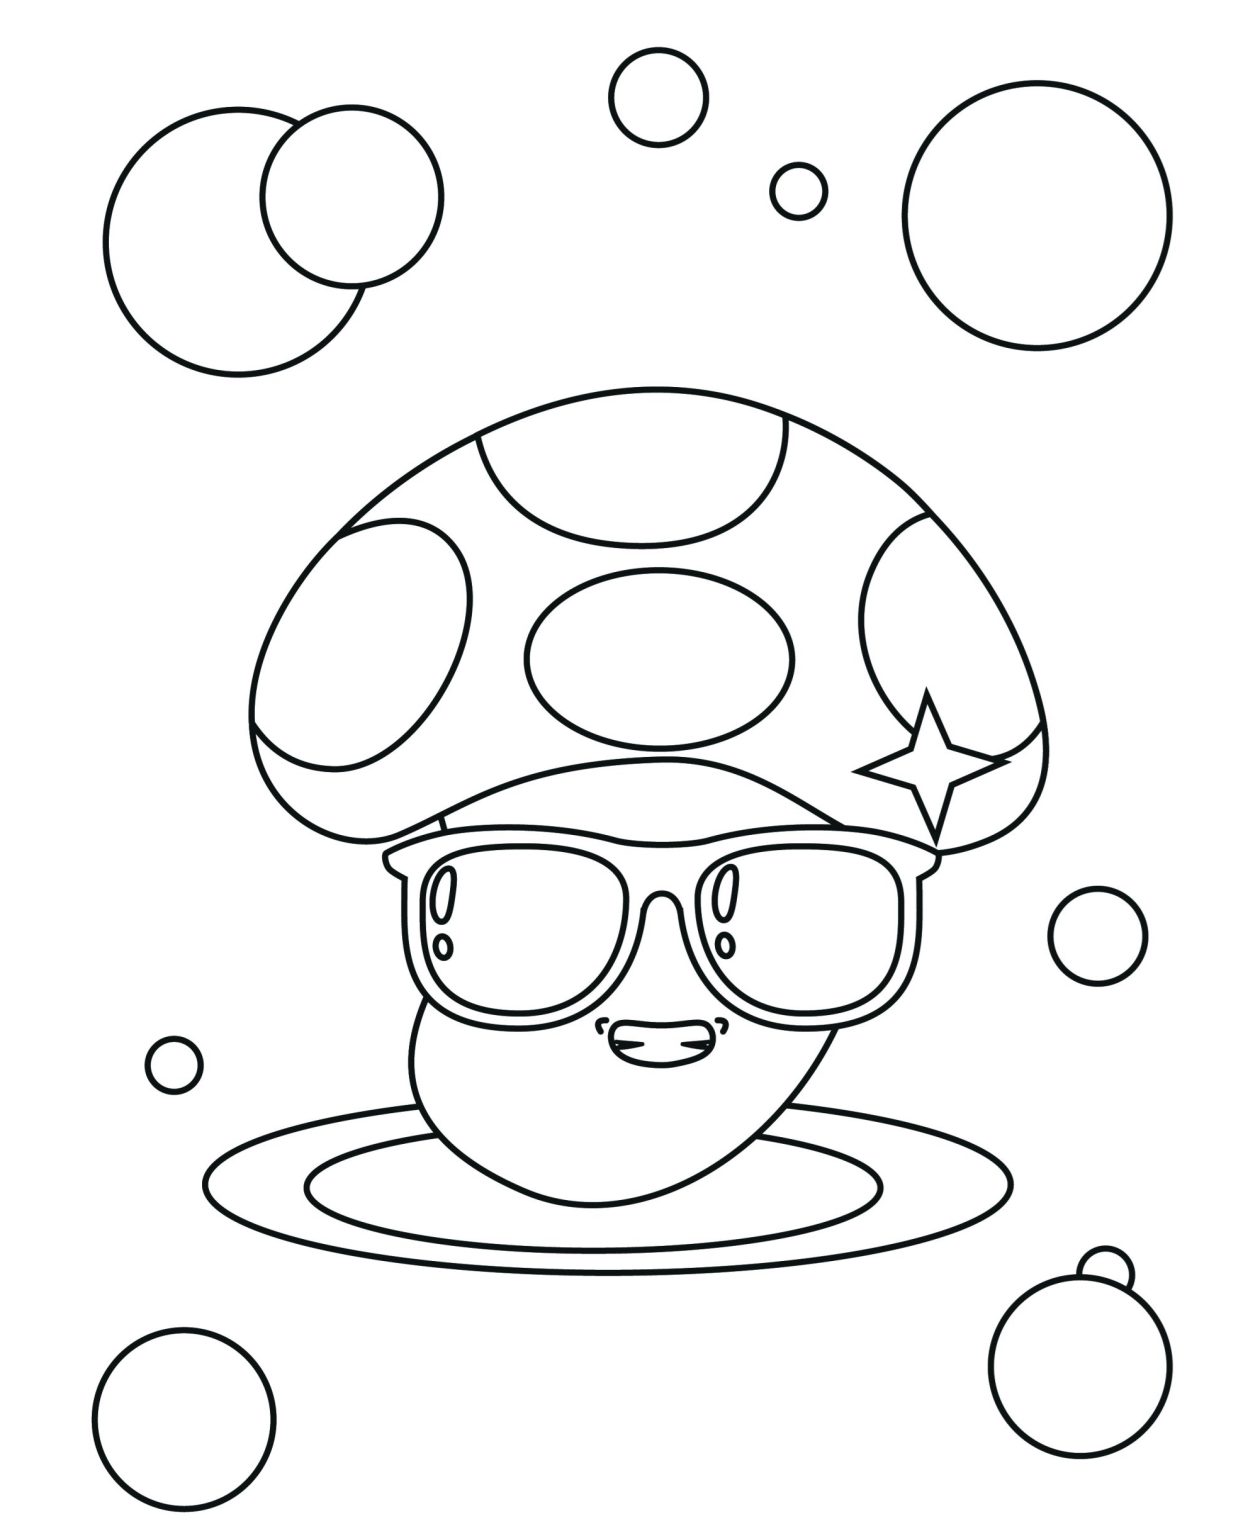 Toadette Coloring Pages Free Printable Coloring Pages The Best Porn Website 